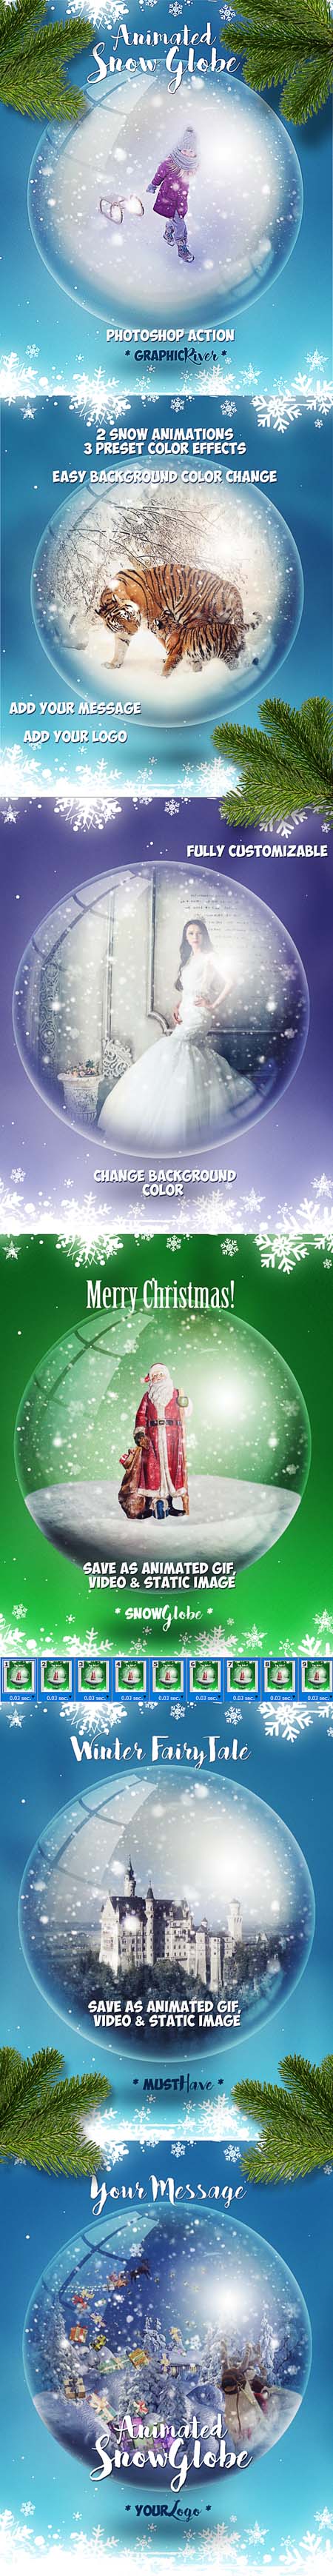 GraphicRiver - Animated Snow Globe Photoshop Action for Christmas 18841655